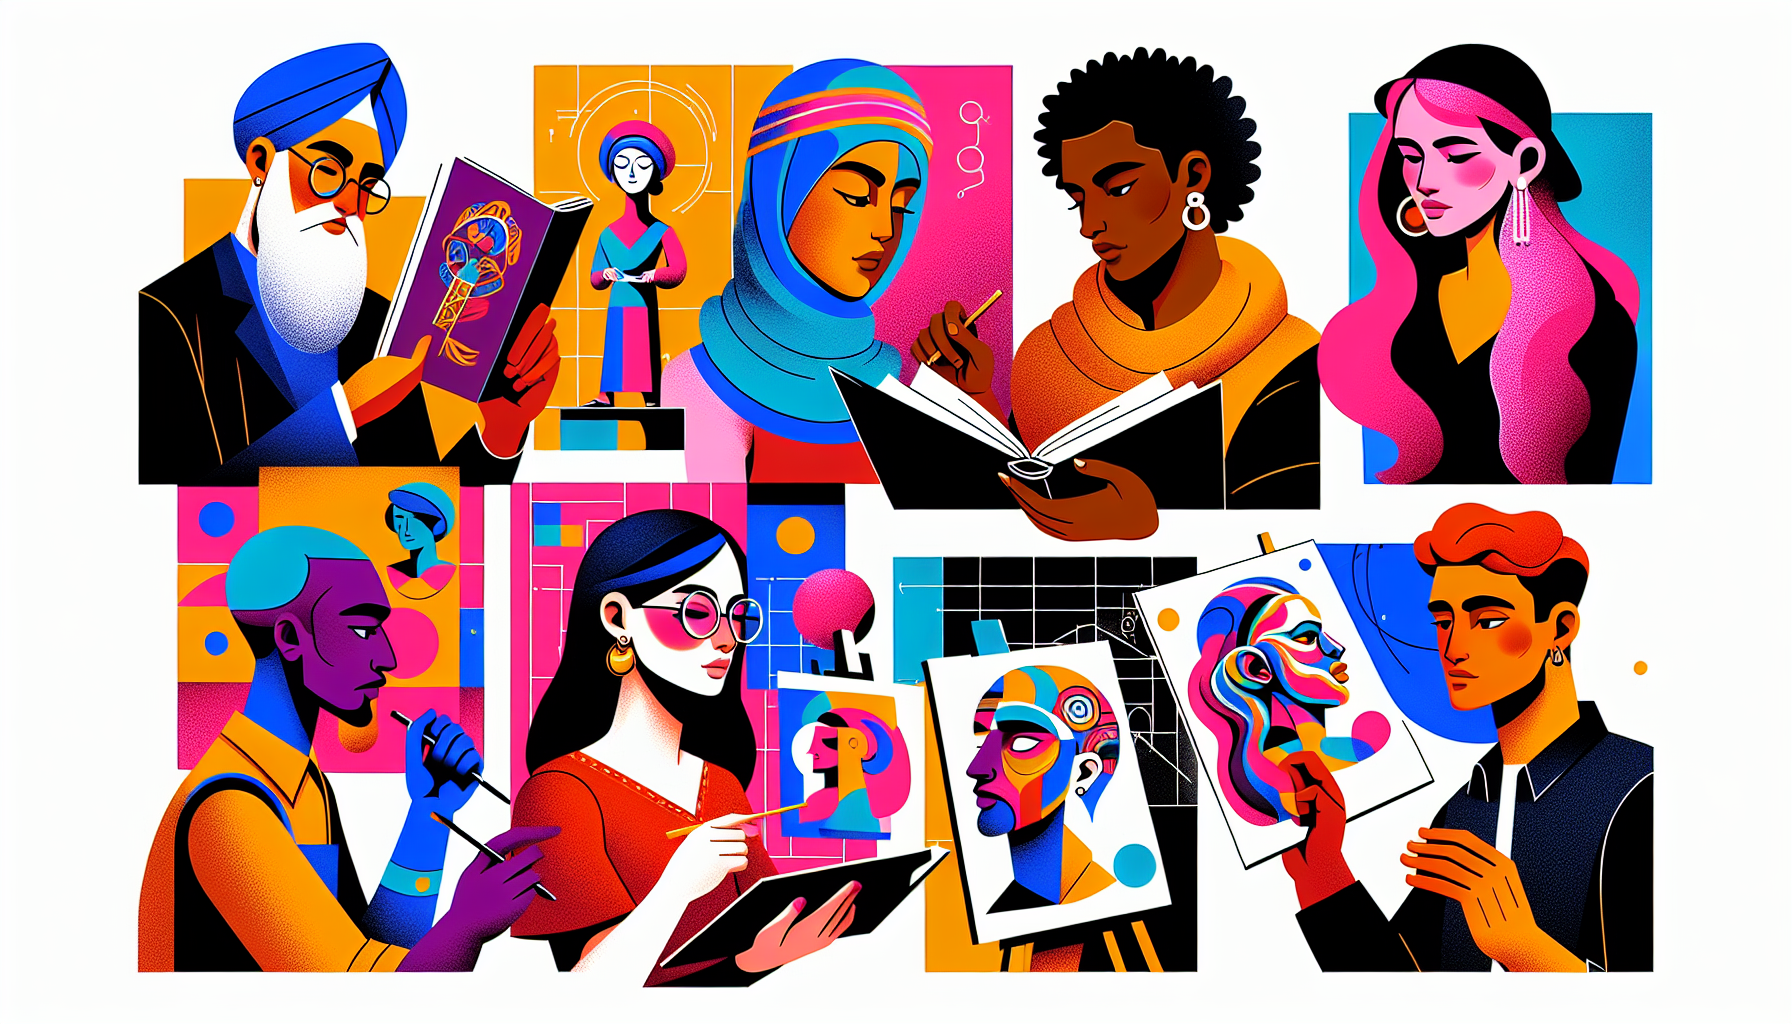 A vibrant and contemporary illustration of several unique characters interacting with each other. Each character should distinctly portray different descents and genders. Perhaps there could be a Middle-Eastern woman reading a book on character development, a Caucasian man sketching a character concept on a canvas, a Black woman examining a clay sculpture of a character, an East Asian man thoughtfully looking at a character blueprint, and a Hispanic man animating a character on a digital tablet. Fill the illustration with colors that are bold and pop, while keeping it modern in style.